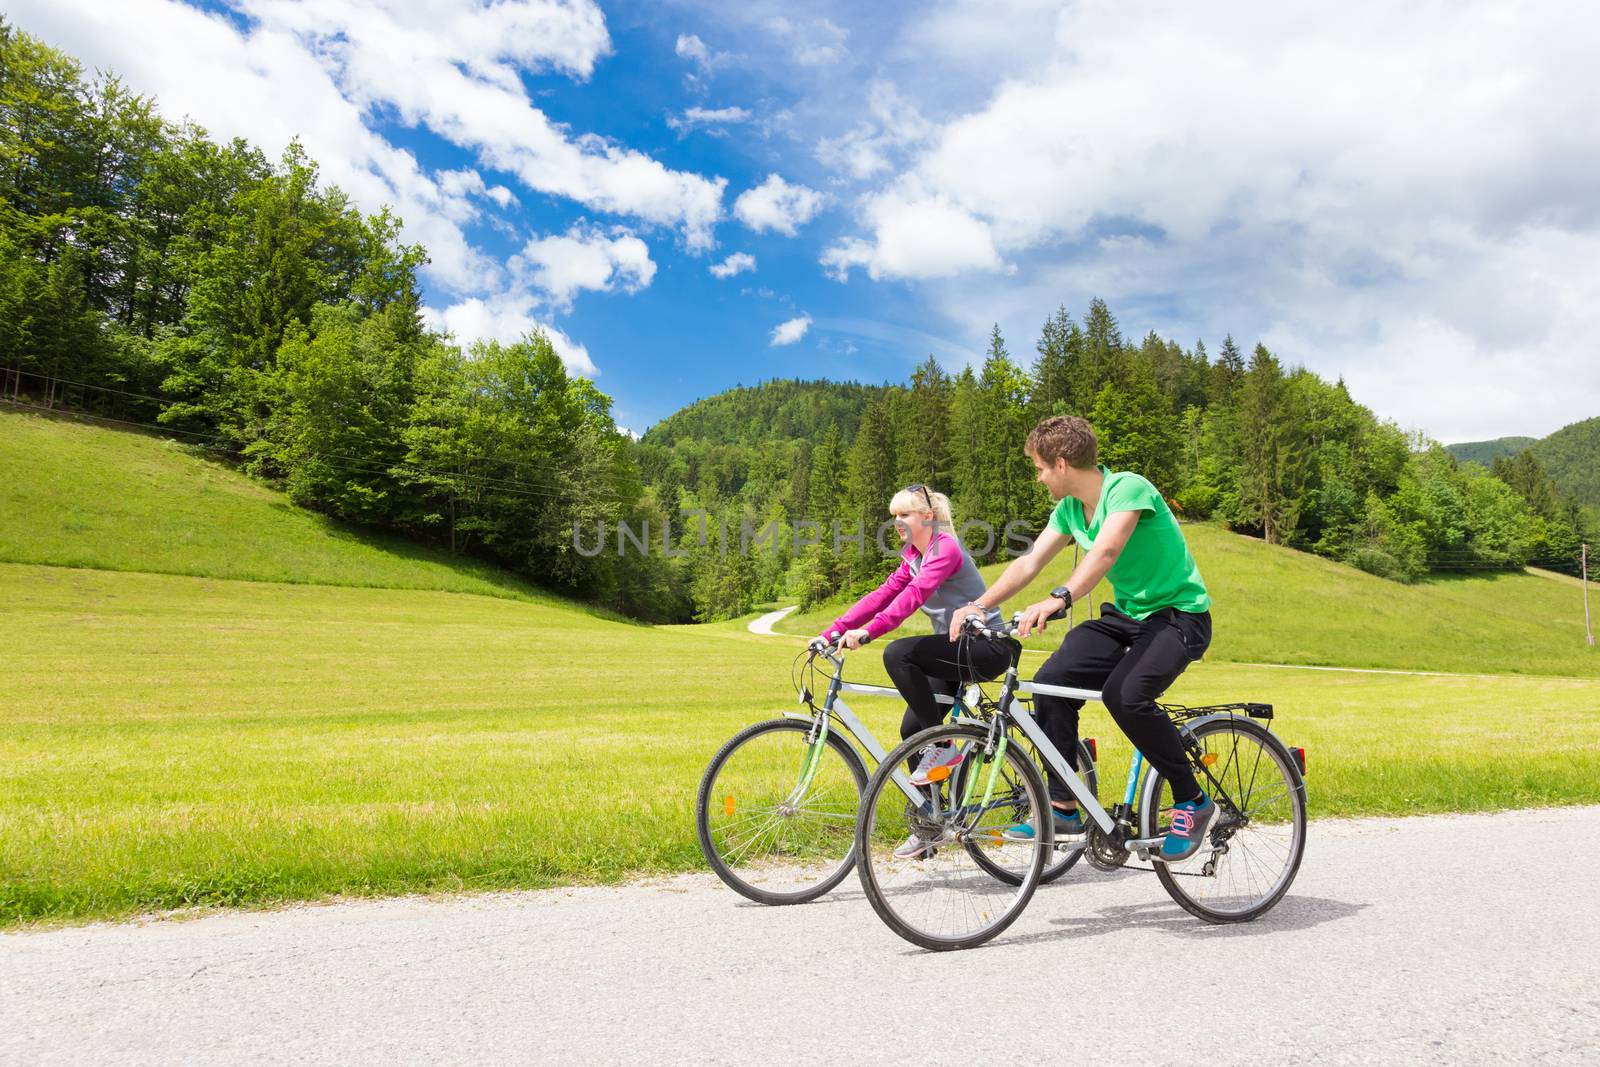 Young spoty active cople biking in nature. Active lifestyle. Activities and recreation outdoors.